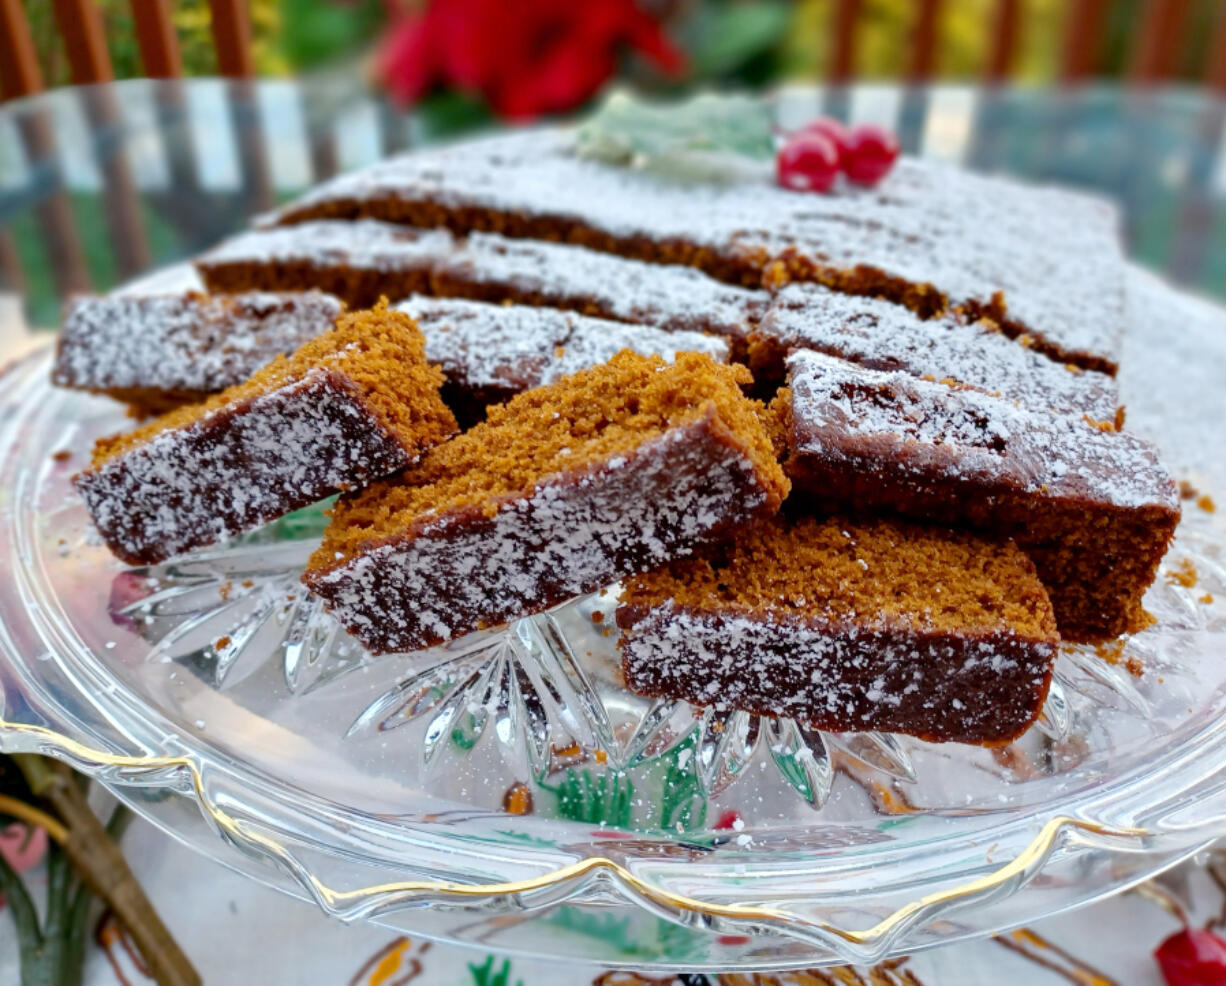 With a half-dozen spices and dark molasses, this old-fashioned gingerbread is Christmas on a cake stand.